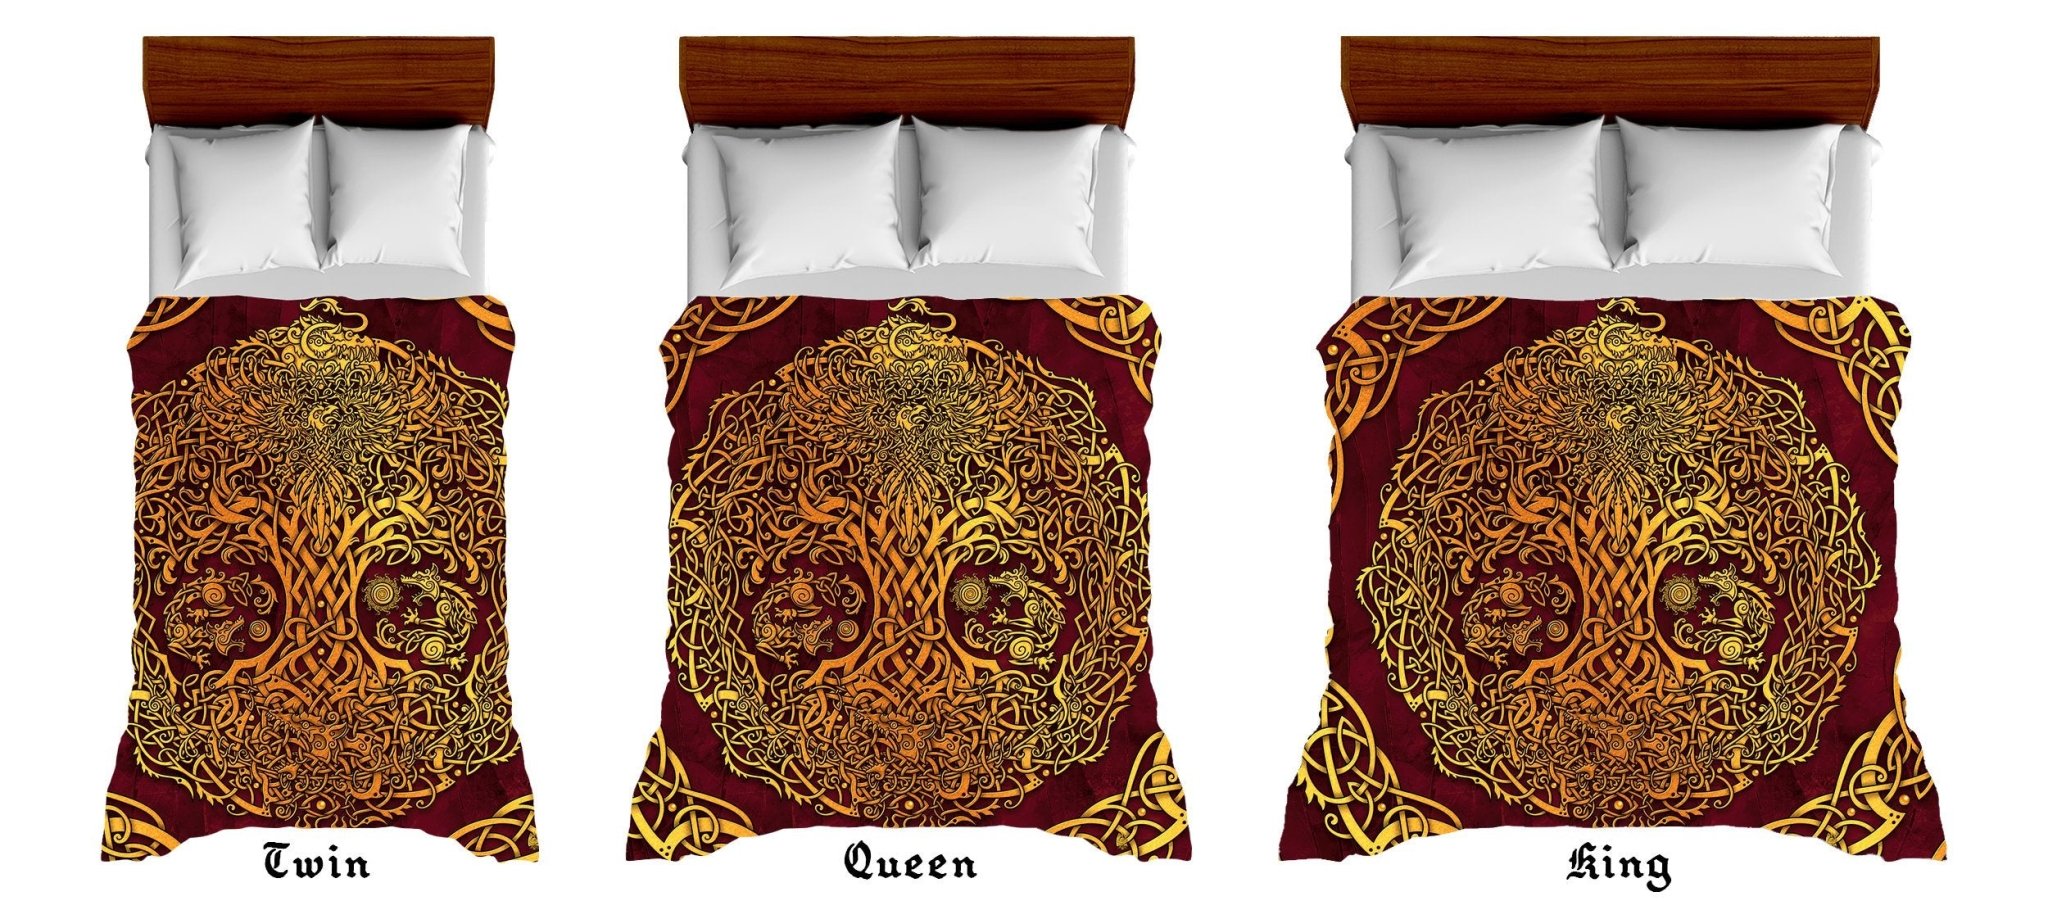 Yggdrasil Bedding Set, Comforter and Duvet, Viking Tree of Life, Norse Bed Cover and Bedroom Decor, King, Queen and Twin Size - Gold and Red - Abysm Internal